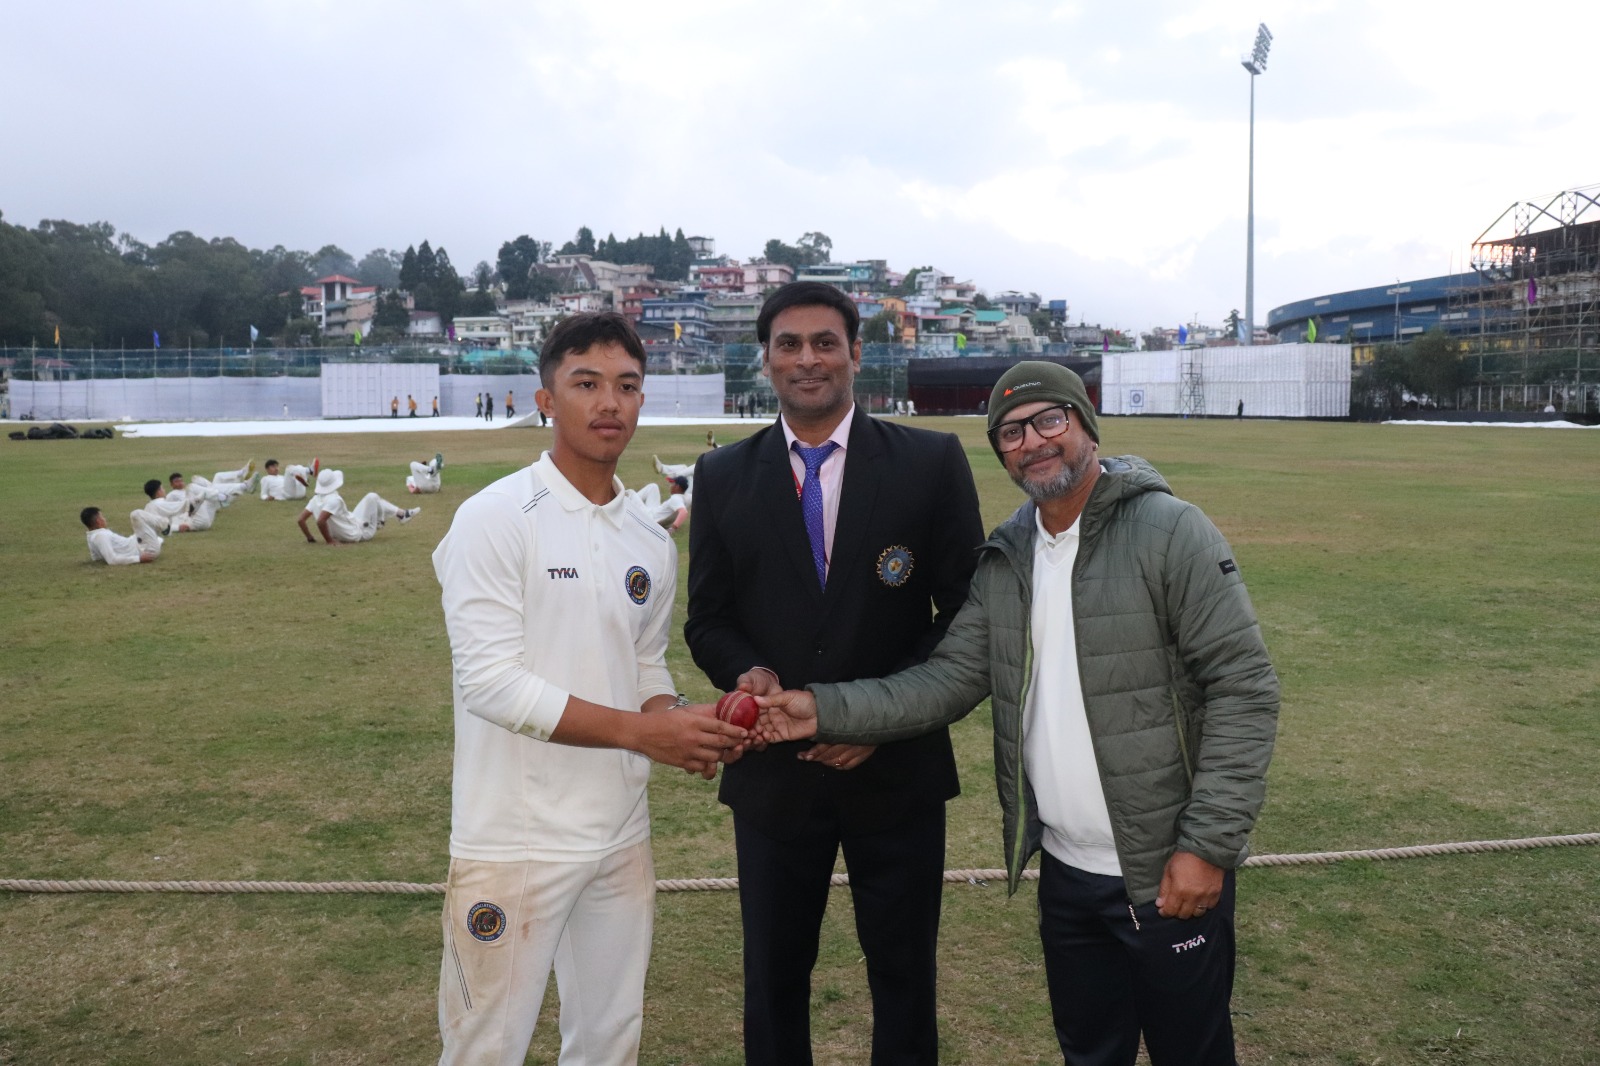 Mizoram's Johan (left) is presented with the ball he bowled with to take figures of 7 for 54